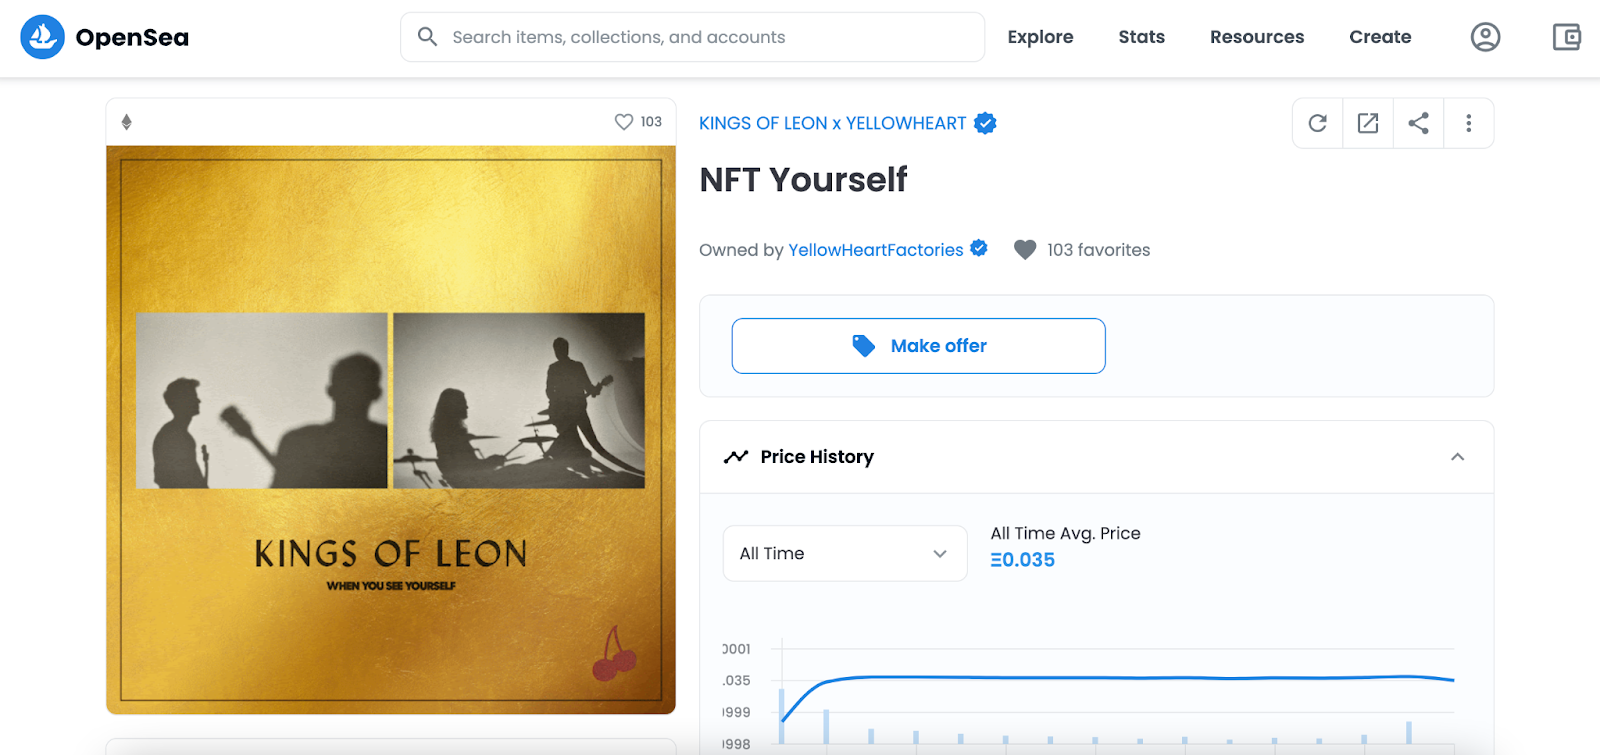 Kings of Leon "NFT Yourself" (music NFTs)